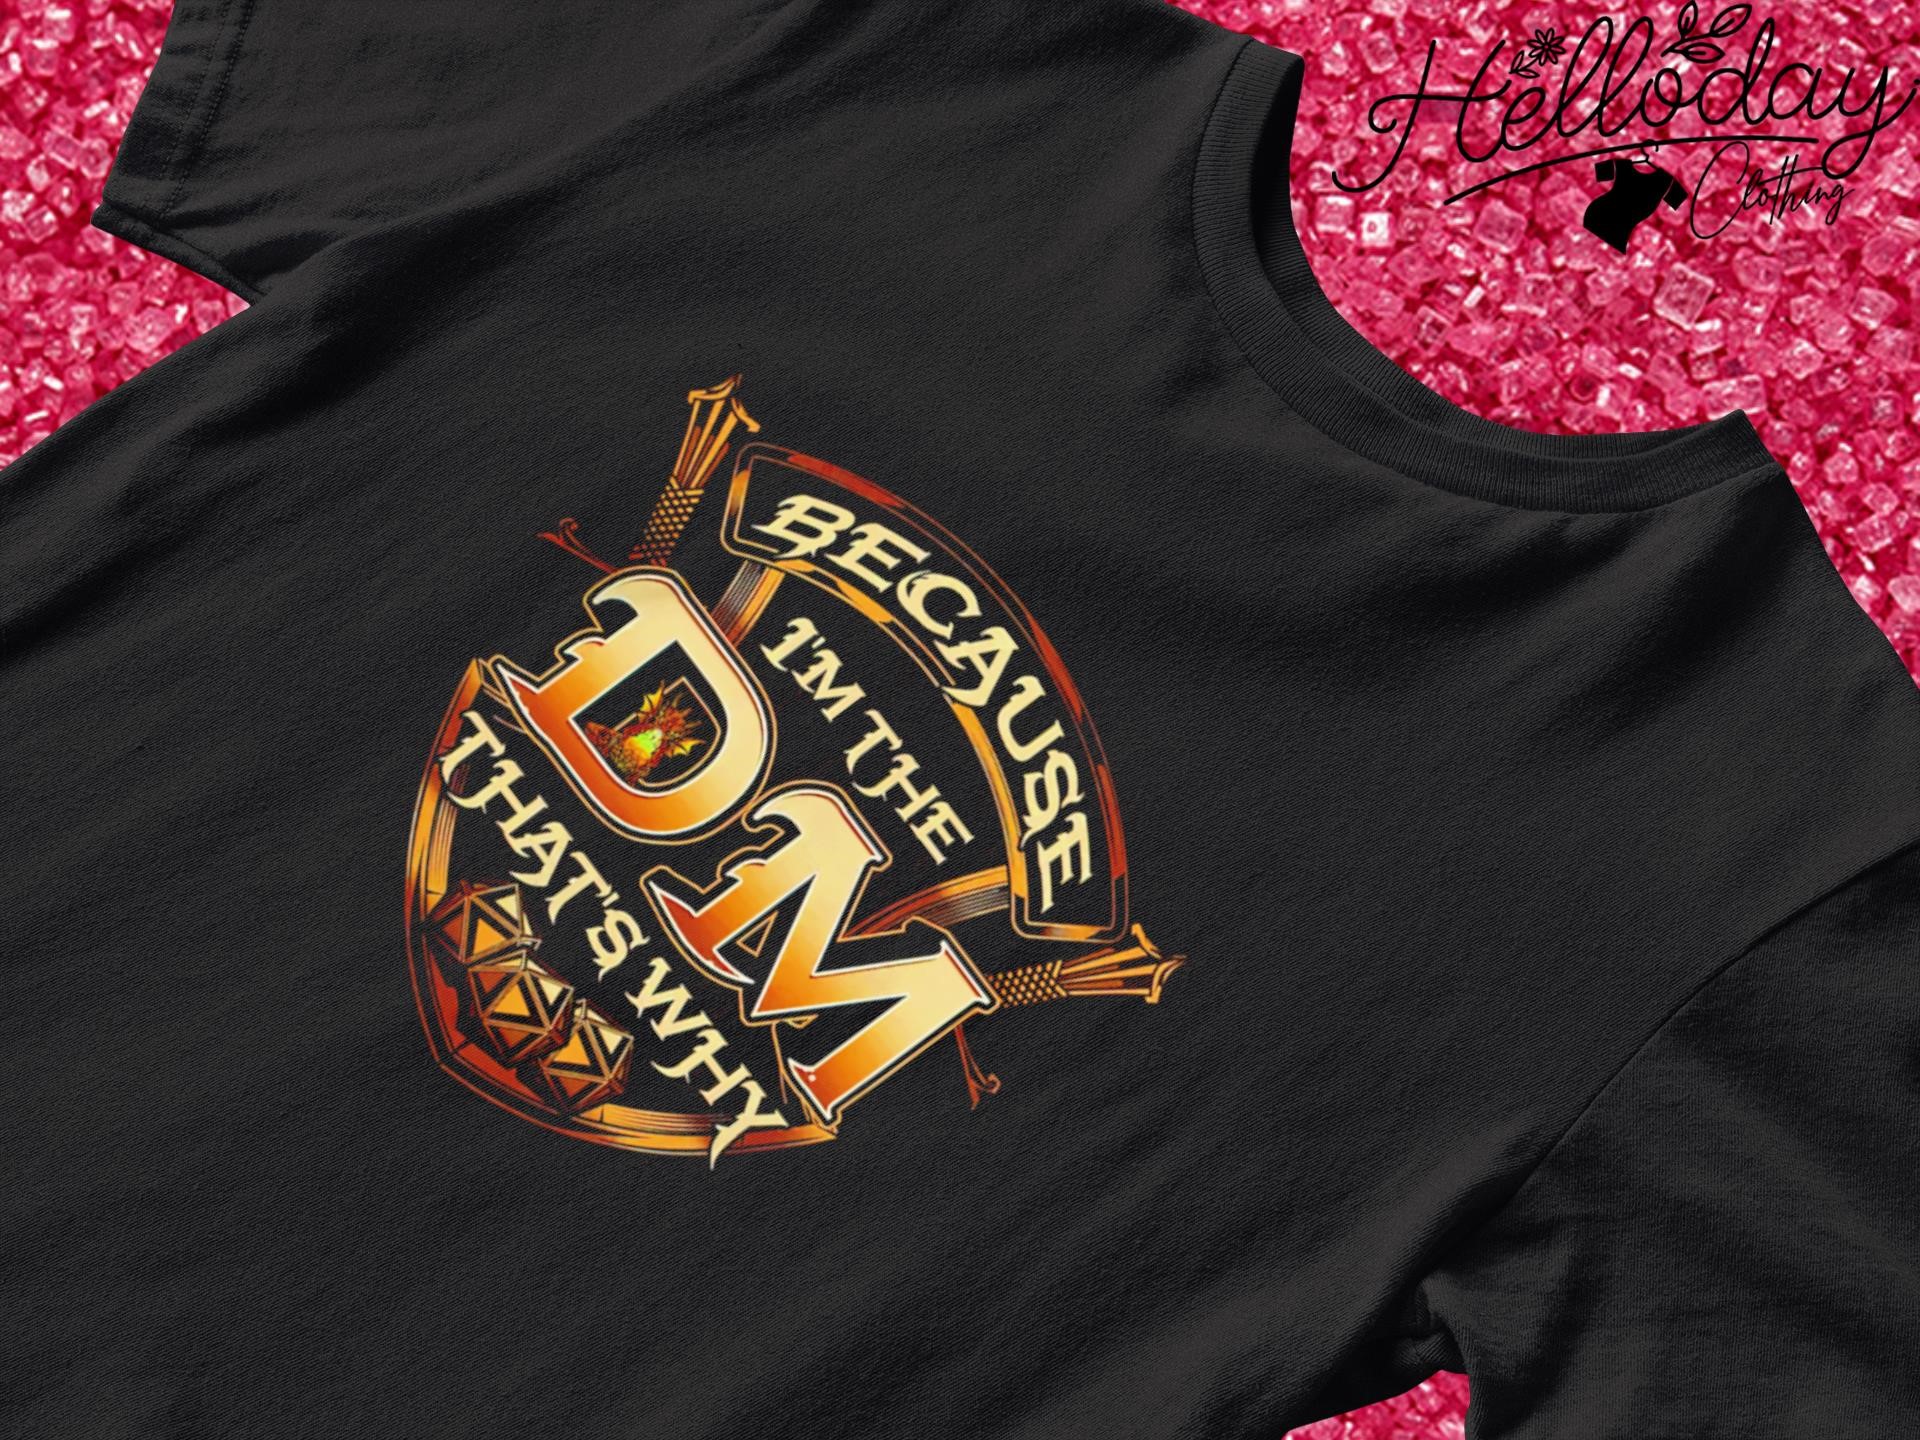 Because I'm the DM that's why Dungeon shirt